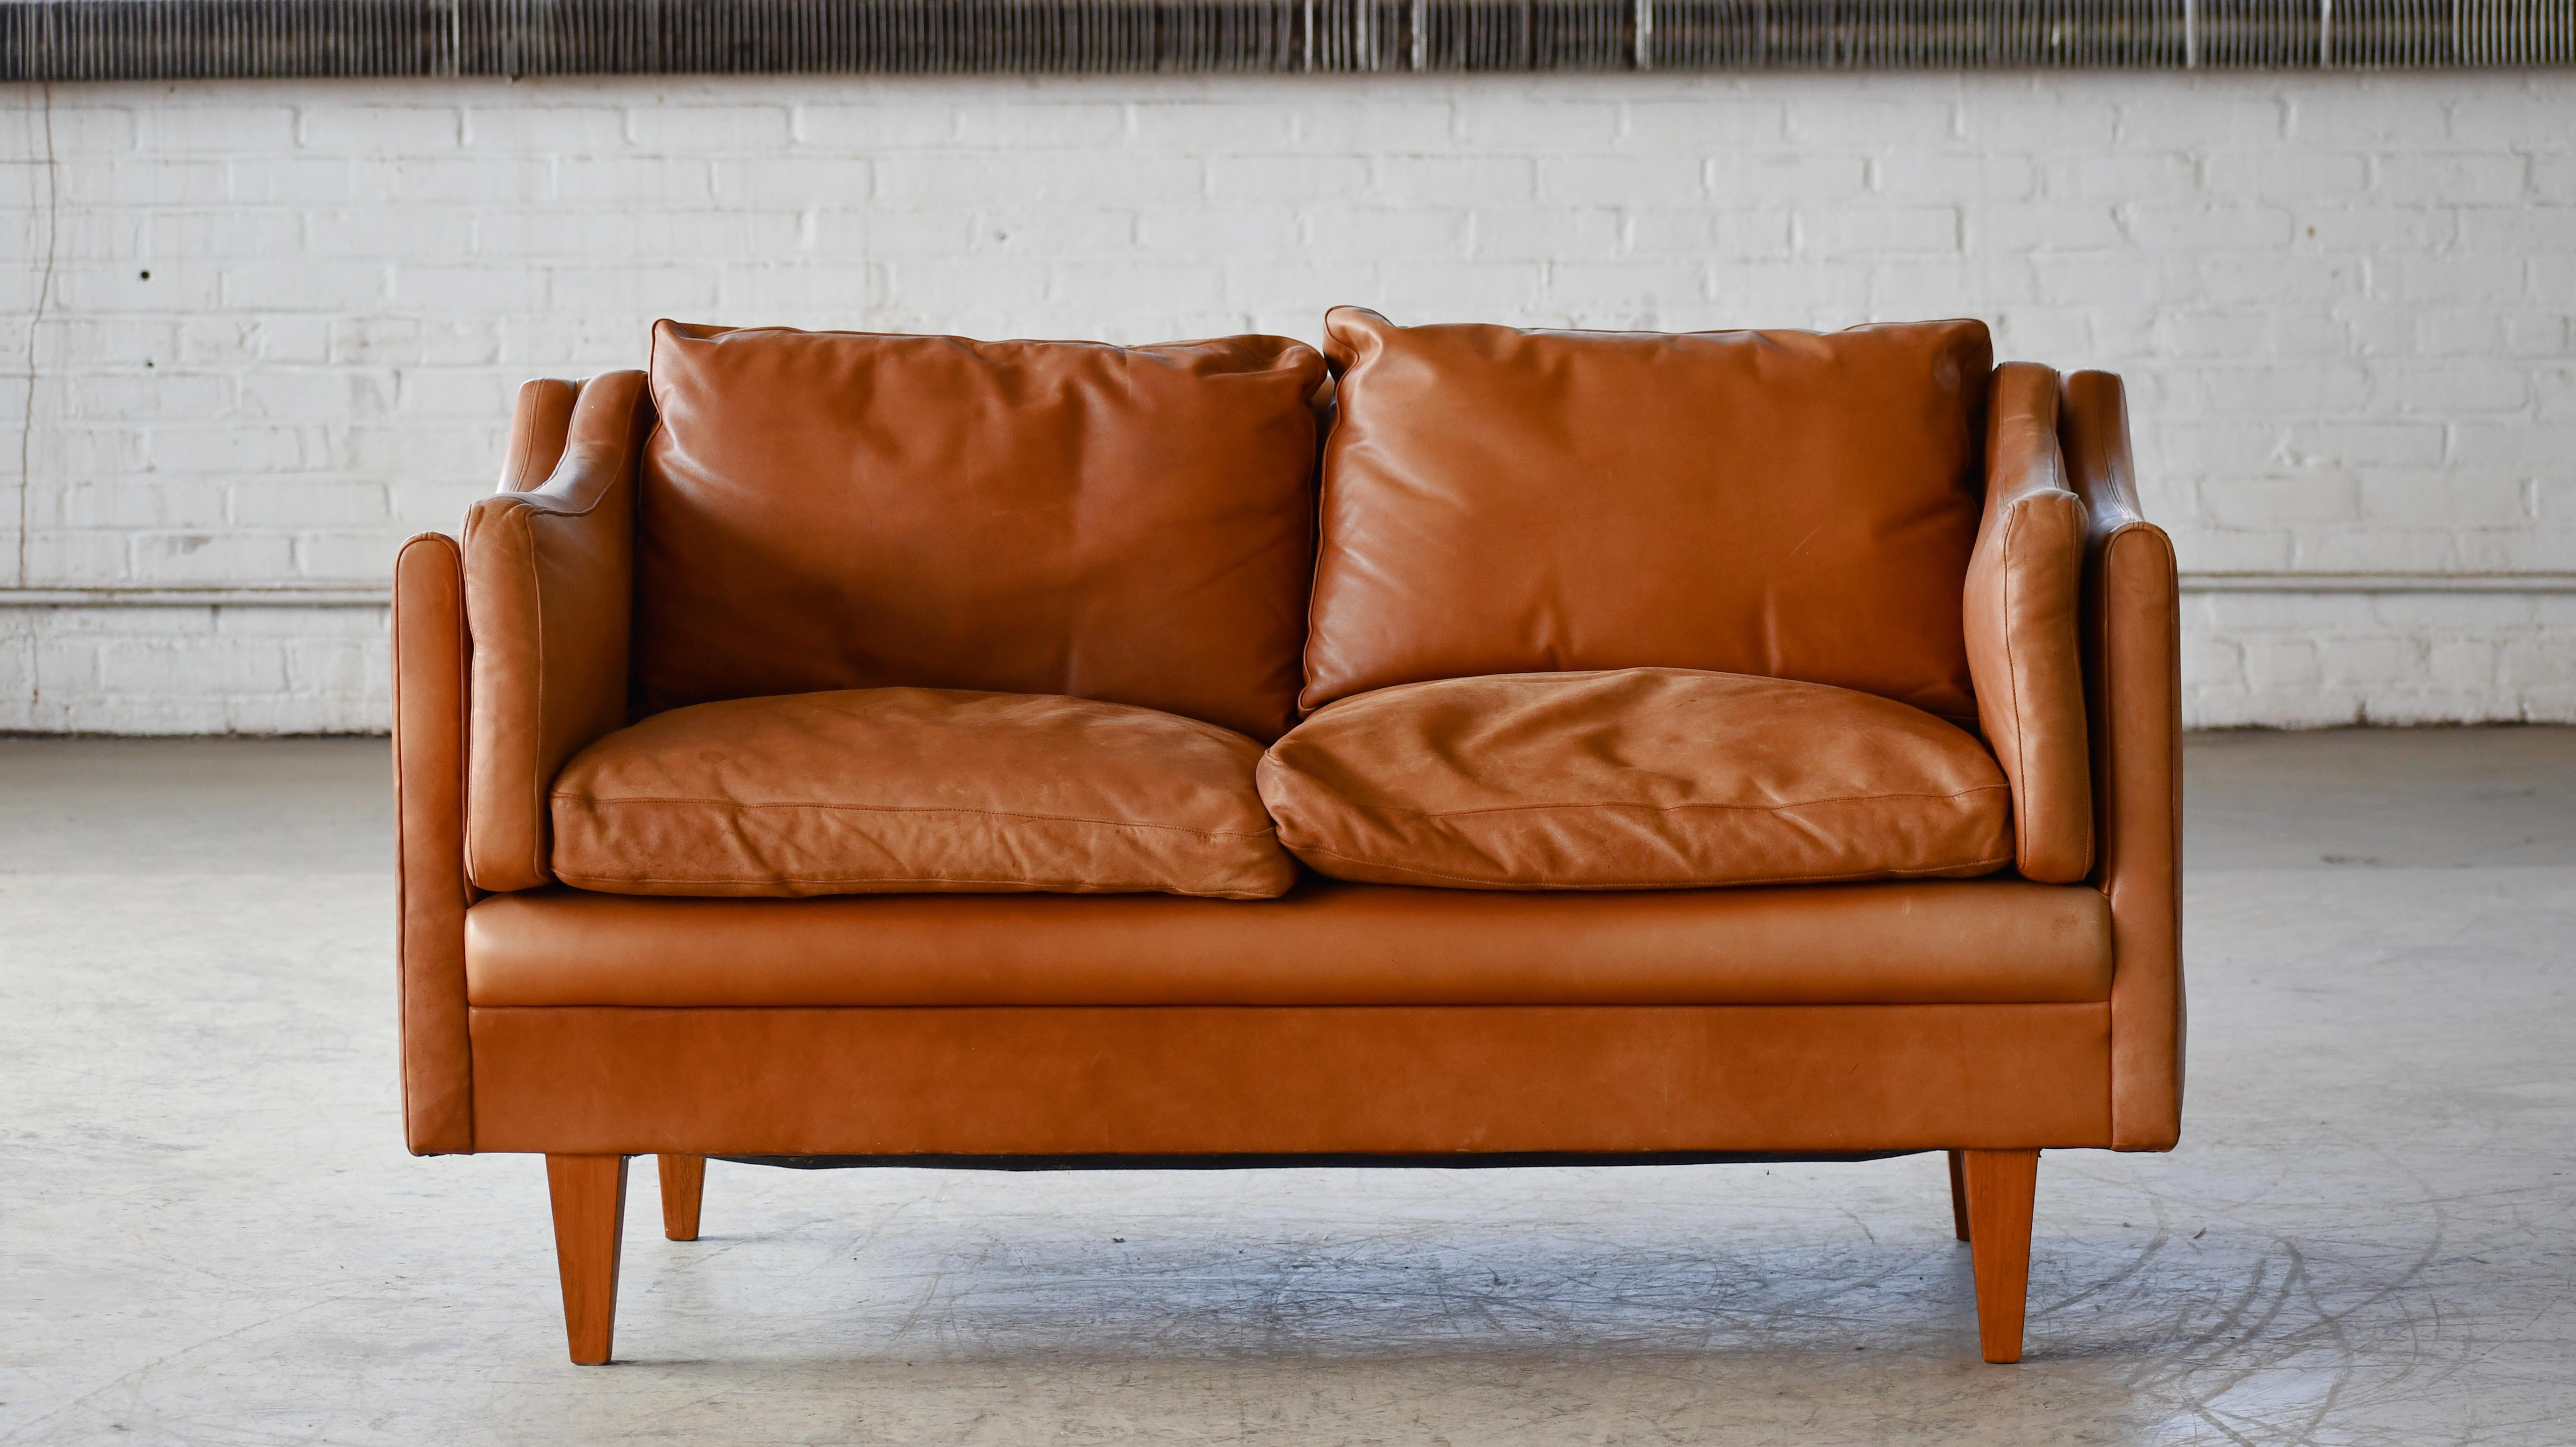 Classic Danish Børge Mogensen style sofa in cognac colored leather. Very much in the style of Illum Wikkelso also with the tapered angled legs very similar to this famous V-series of furniture.   Down filled cushions providing the perfect relaxed